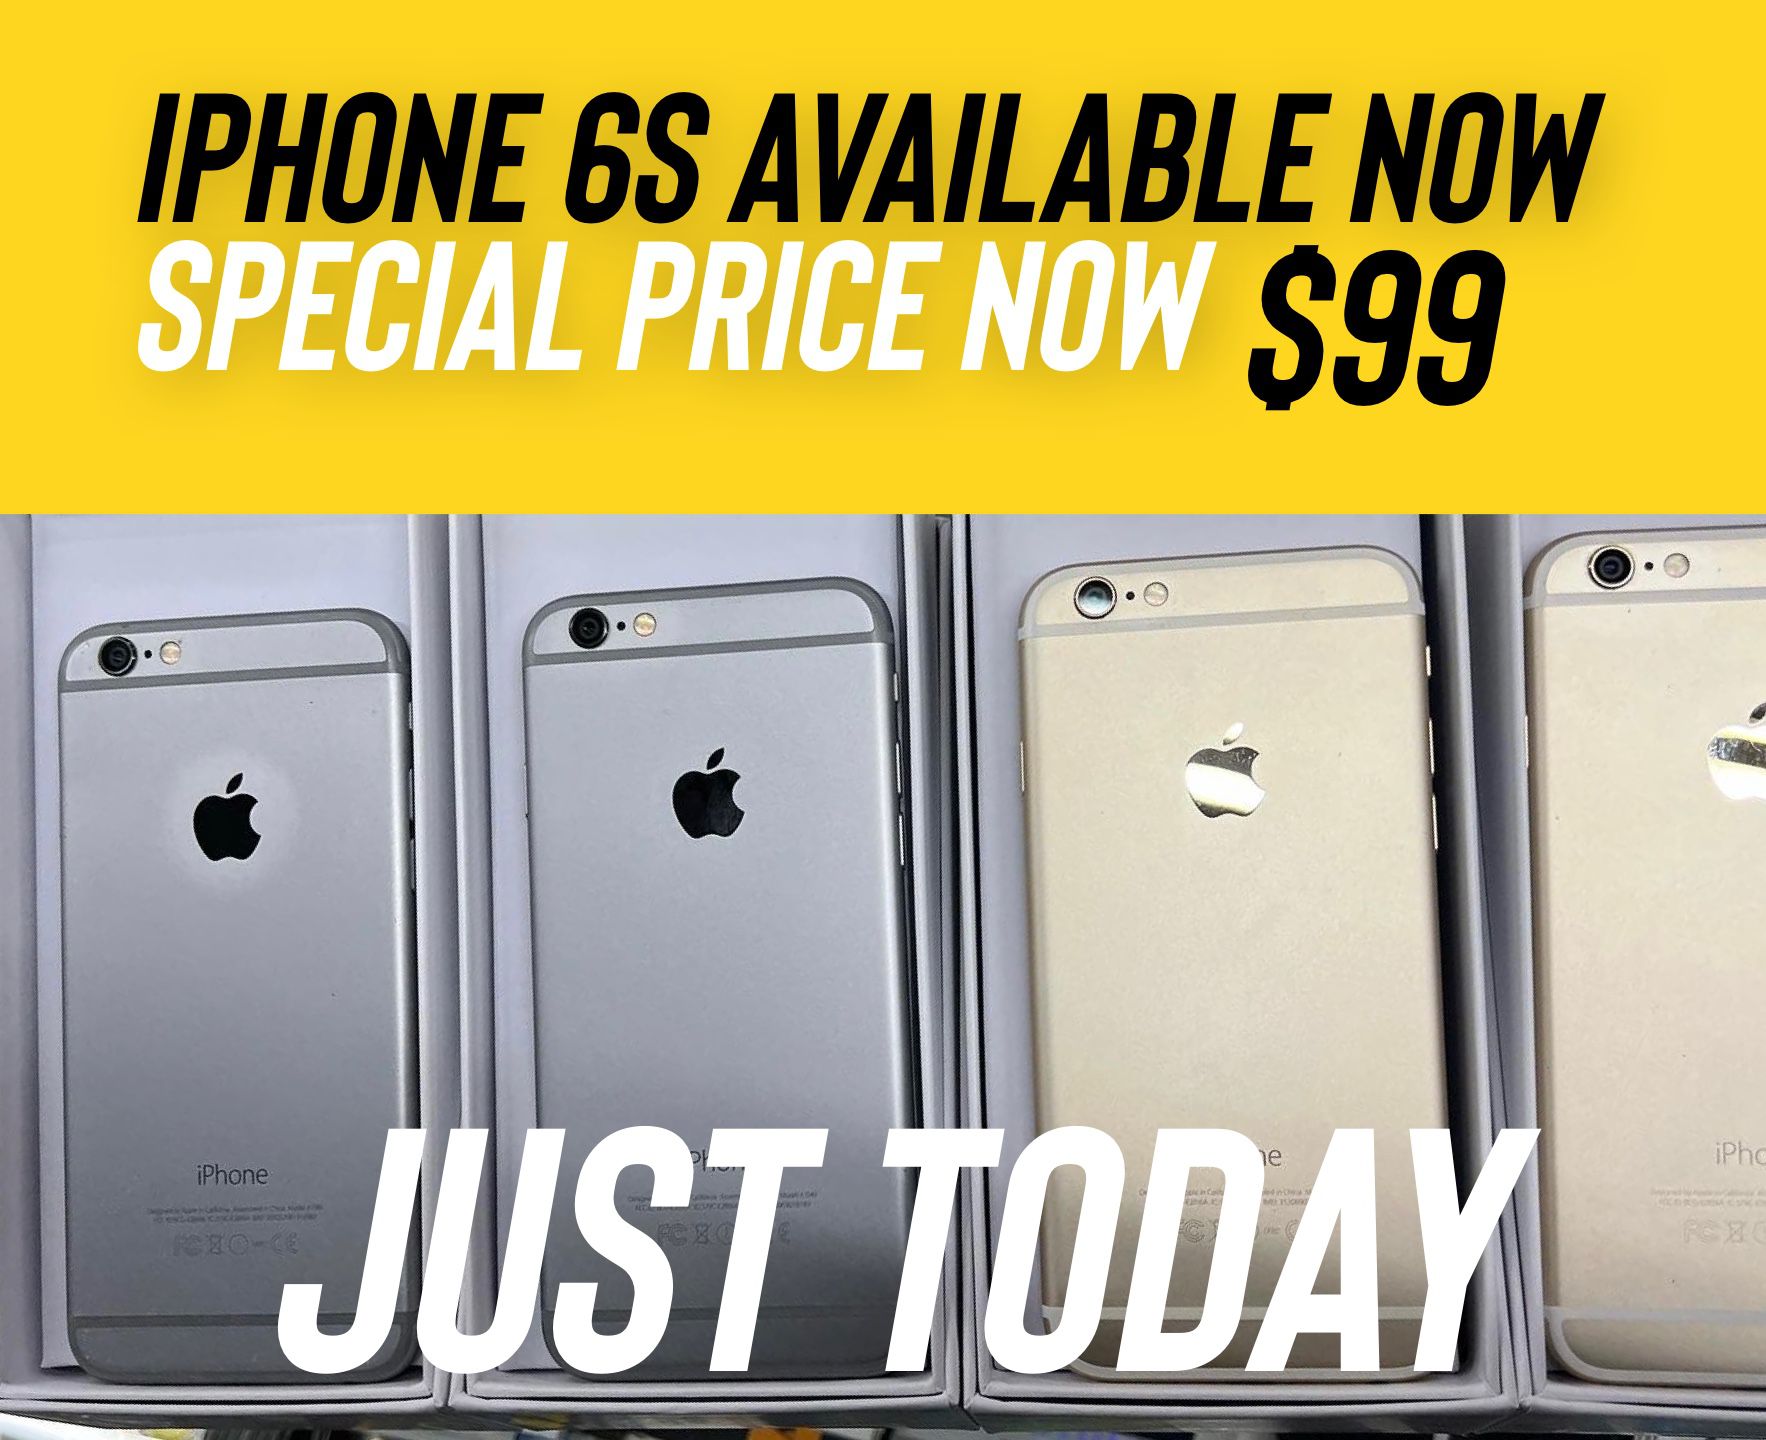 WOW IPHONE 6S AVAILABLE NOW SPECIAL PRICE